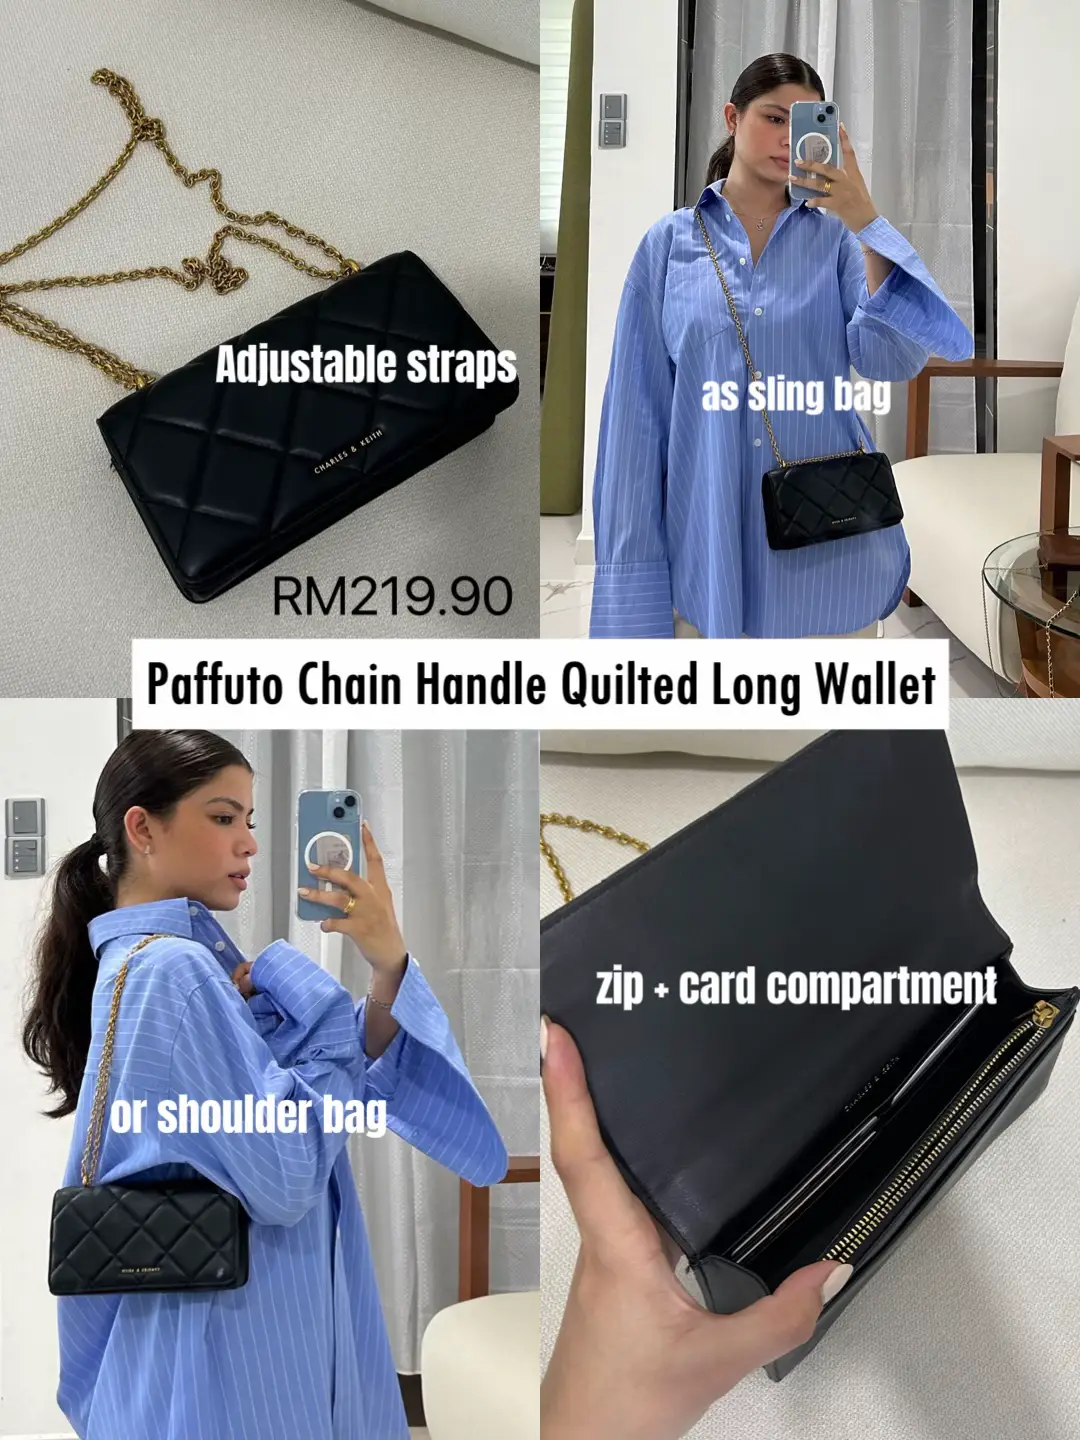 Charles & Keith Paffuto Chain Handle Quilted Long Wallet Black